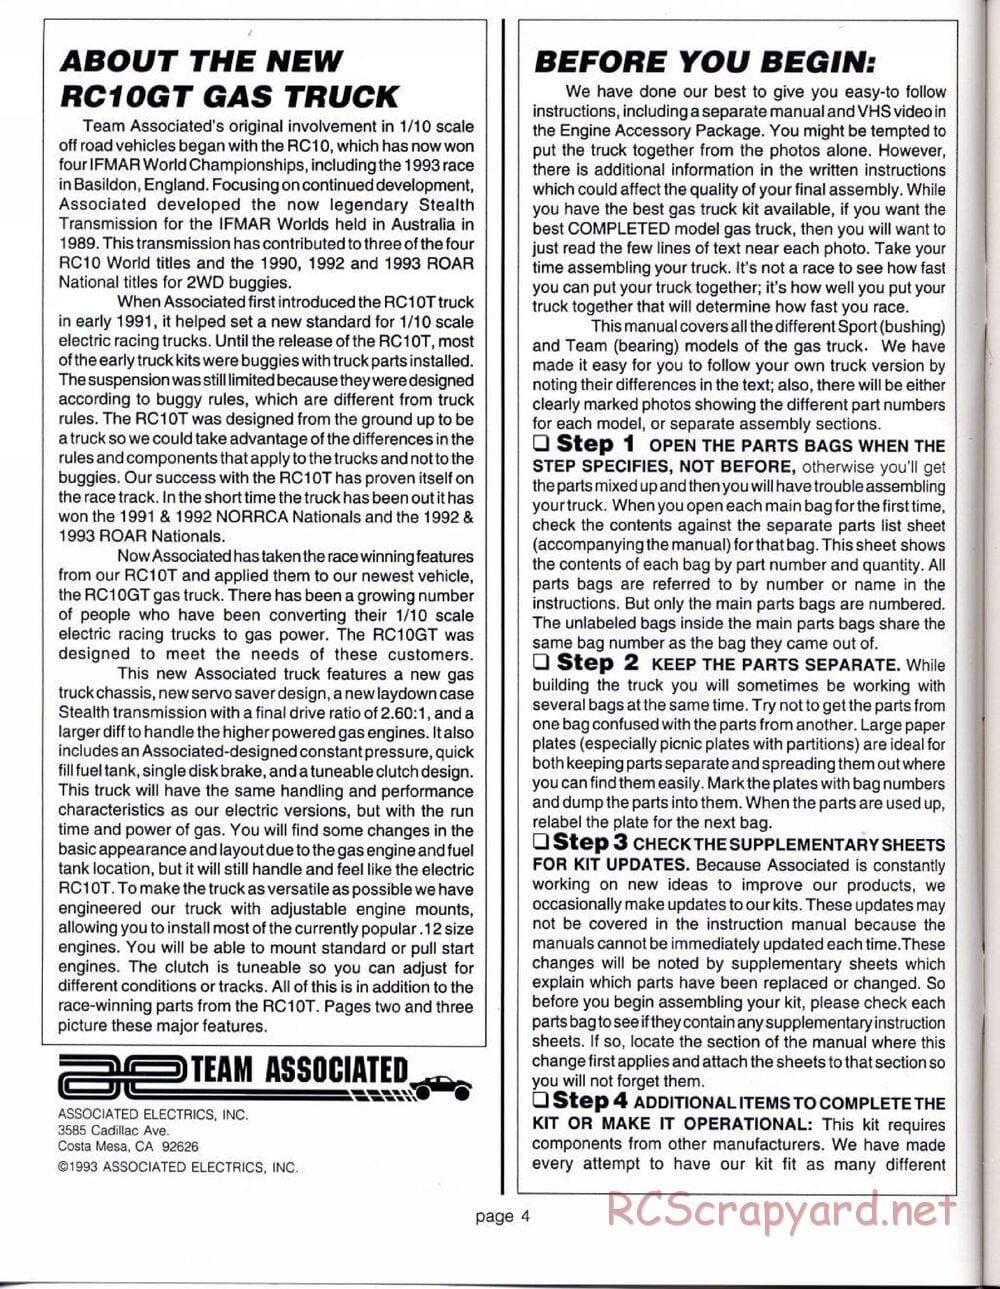 Team Associated - RC10GT (1993) - Manual - Page 4